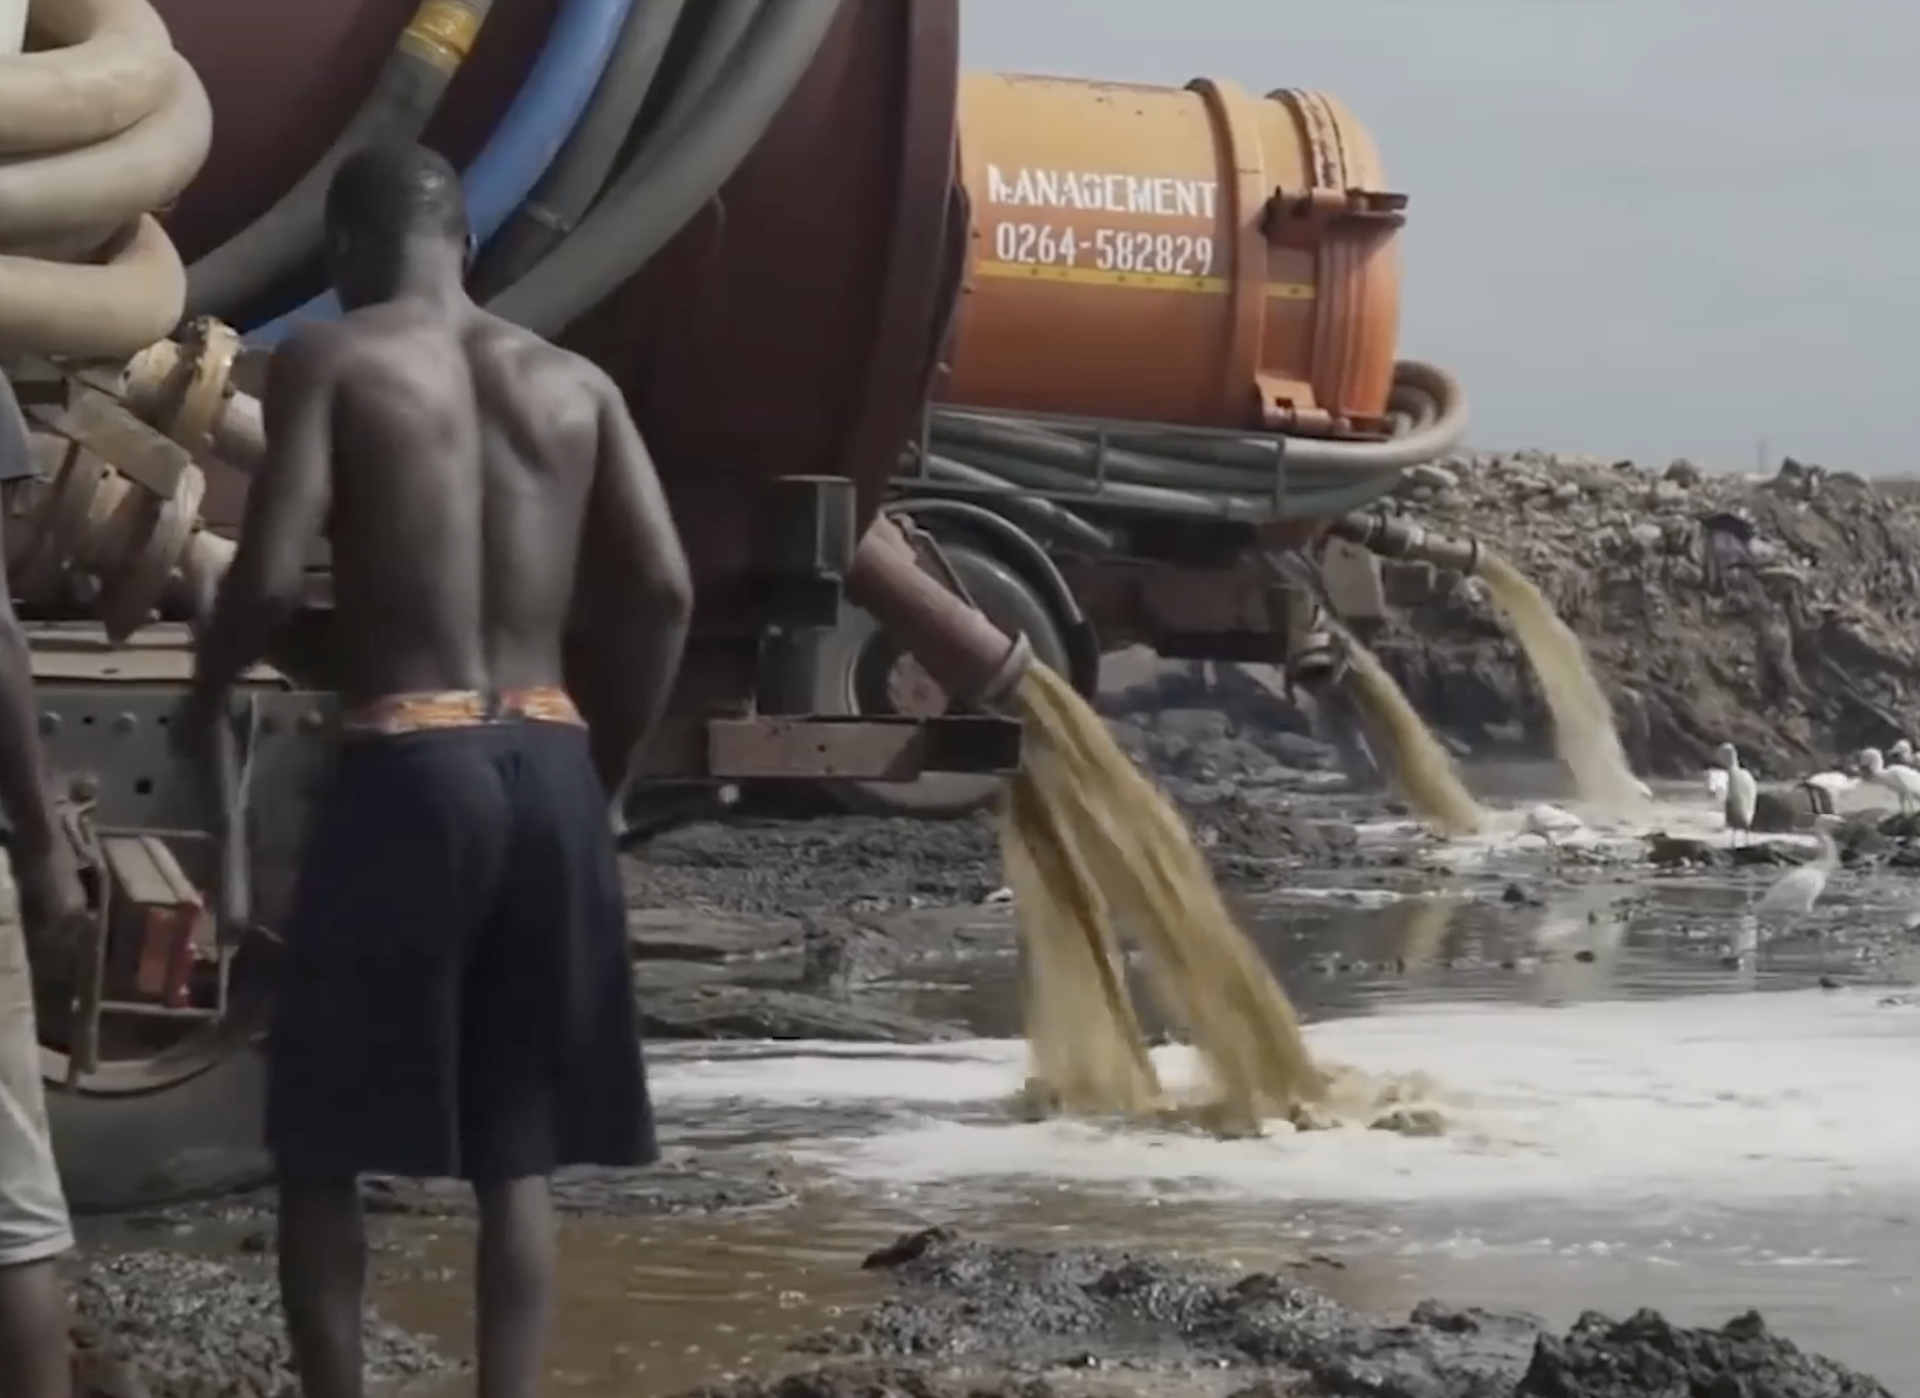 Vacuum trucks offload human waste at a site in Ghana, West Africa. Existing facilities cannot adequately process all the human waste that is collected, and some is offloaded at locations where environ